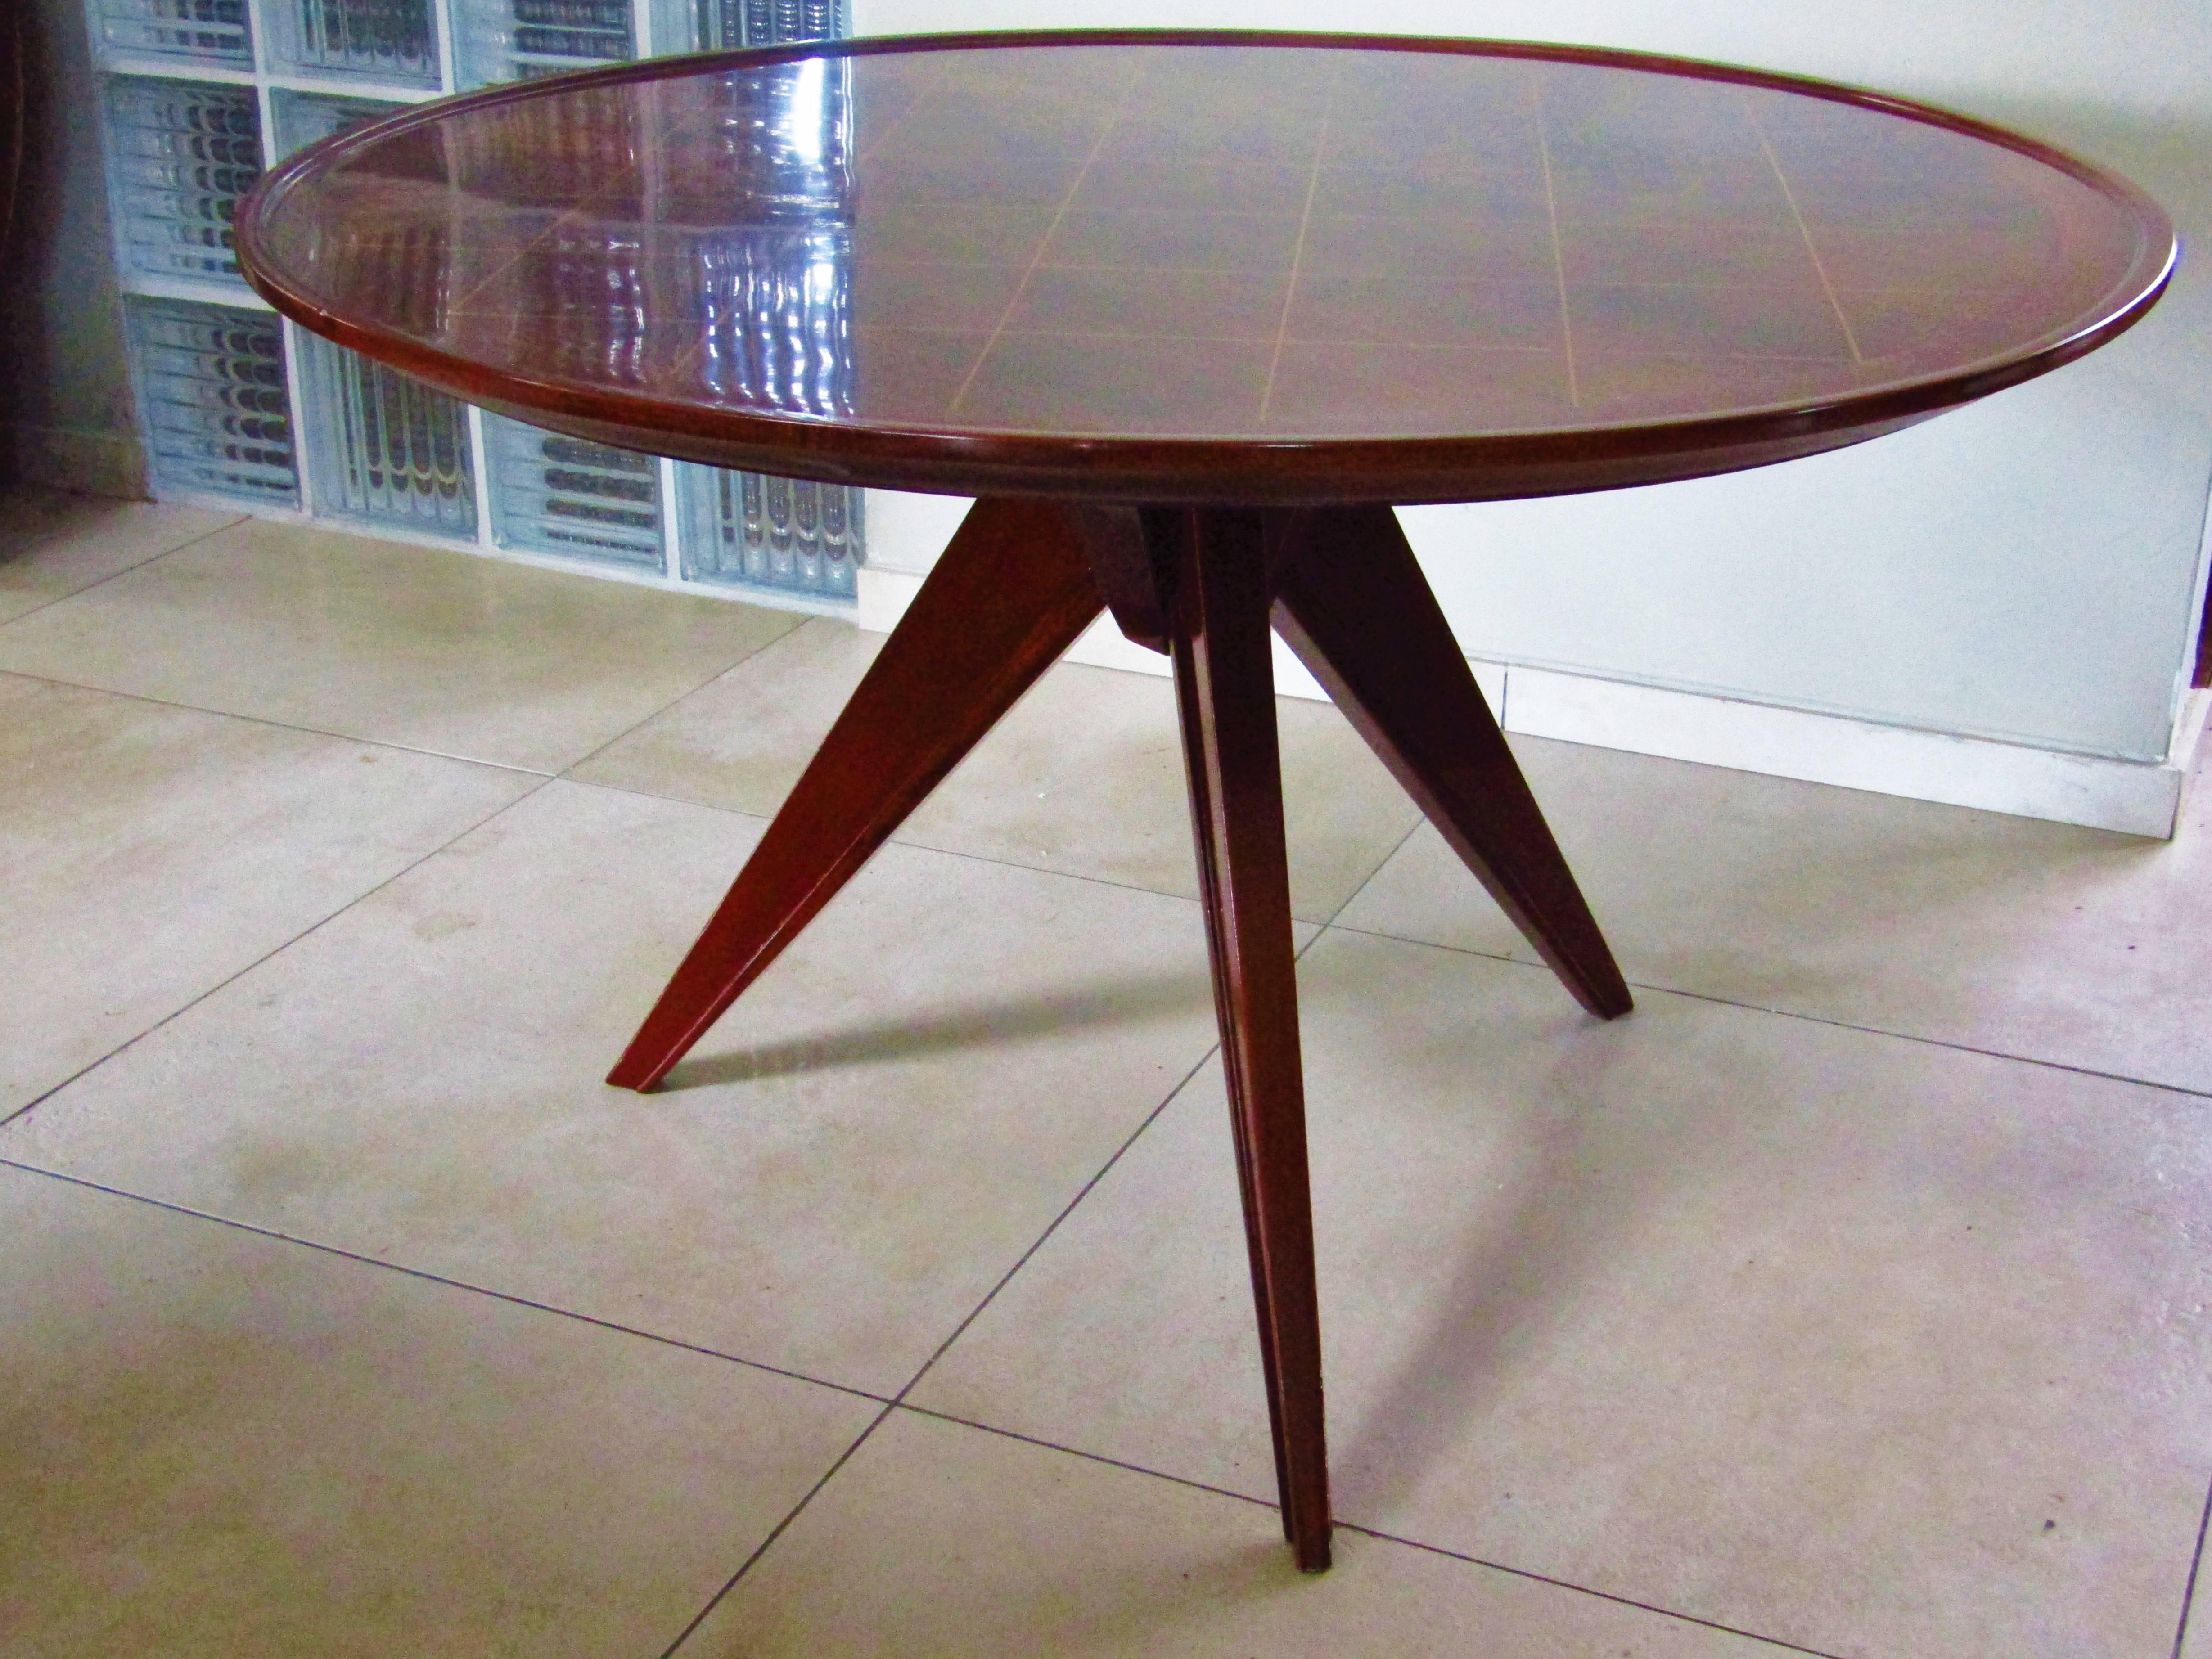 Midcentury Art Deco rosewood coffee table, France, 1940s. With sycamore inlays. Full restored with high gloss lacquer.

 